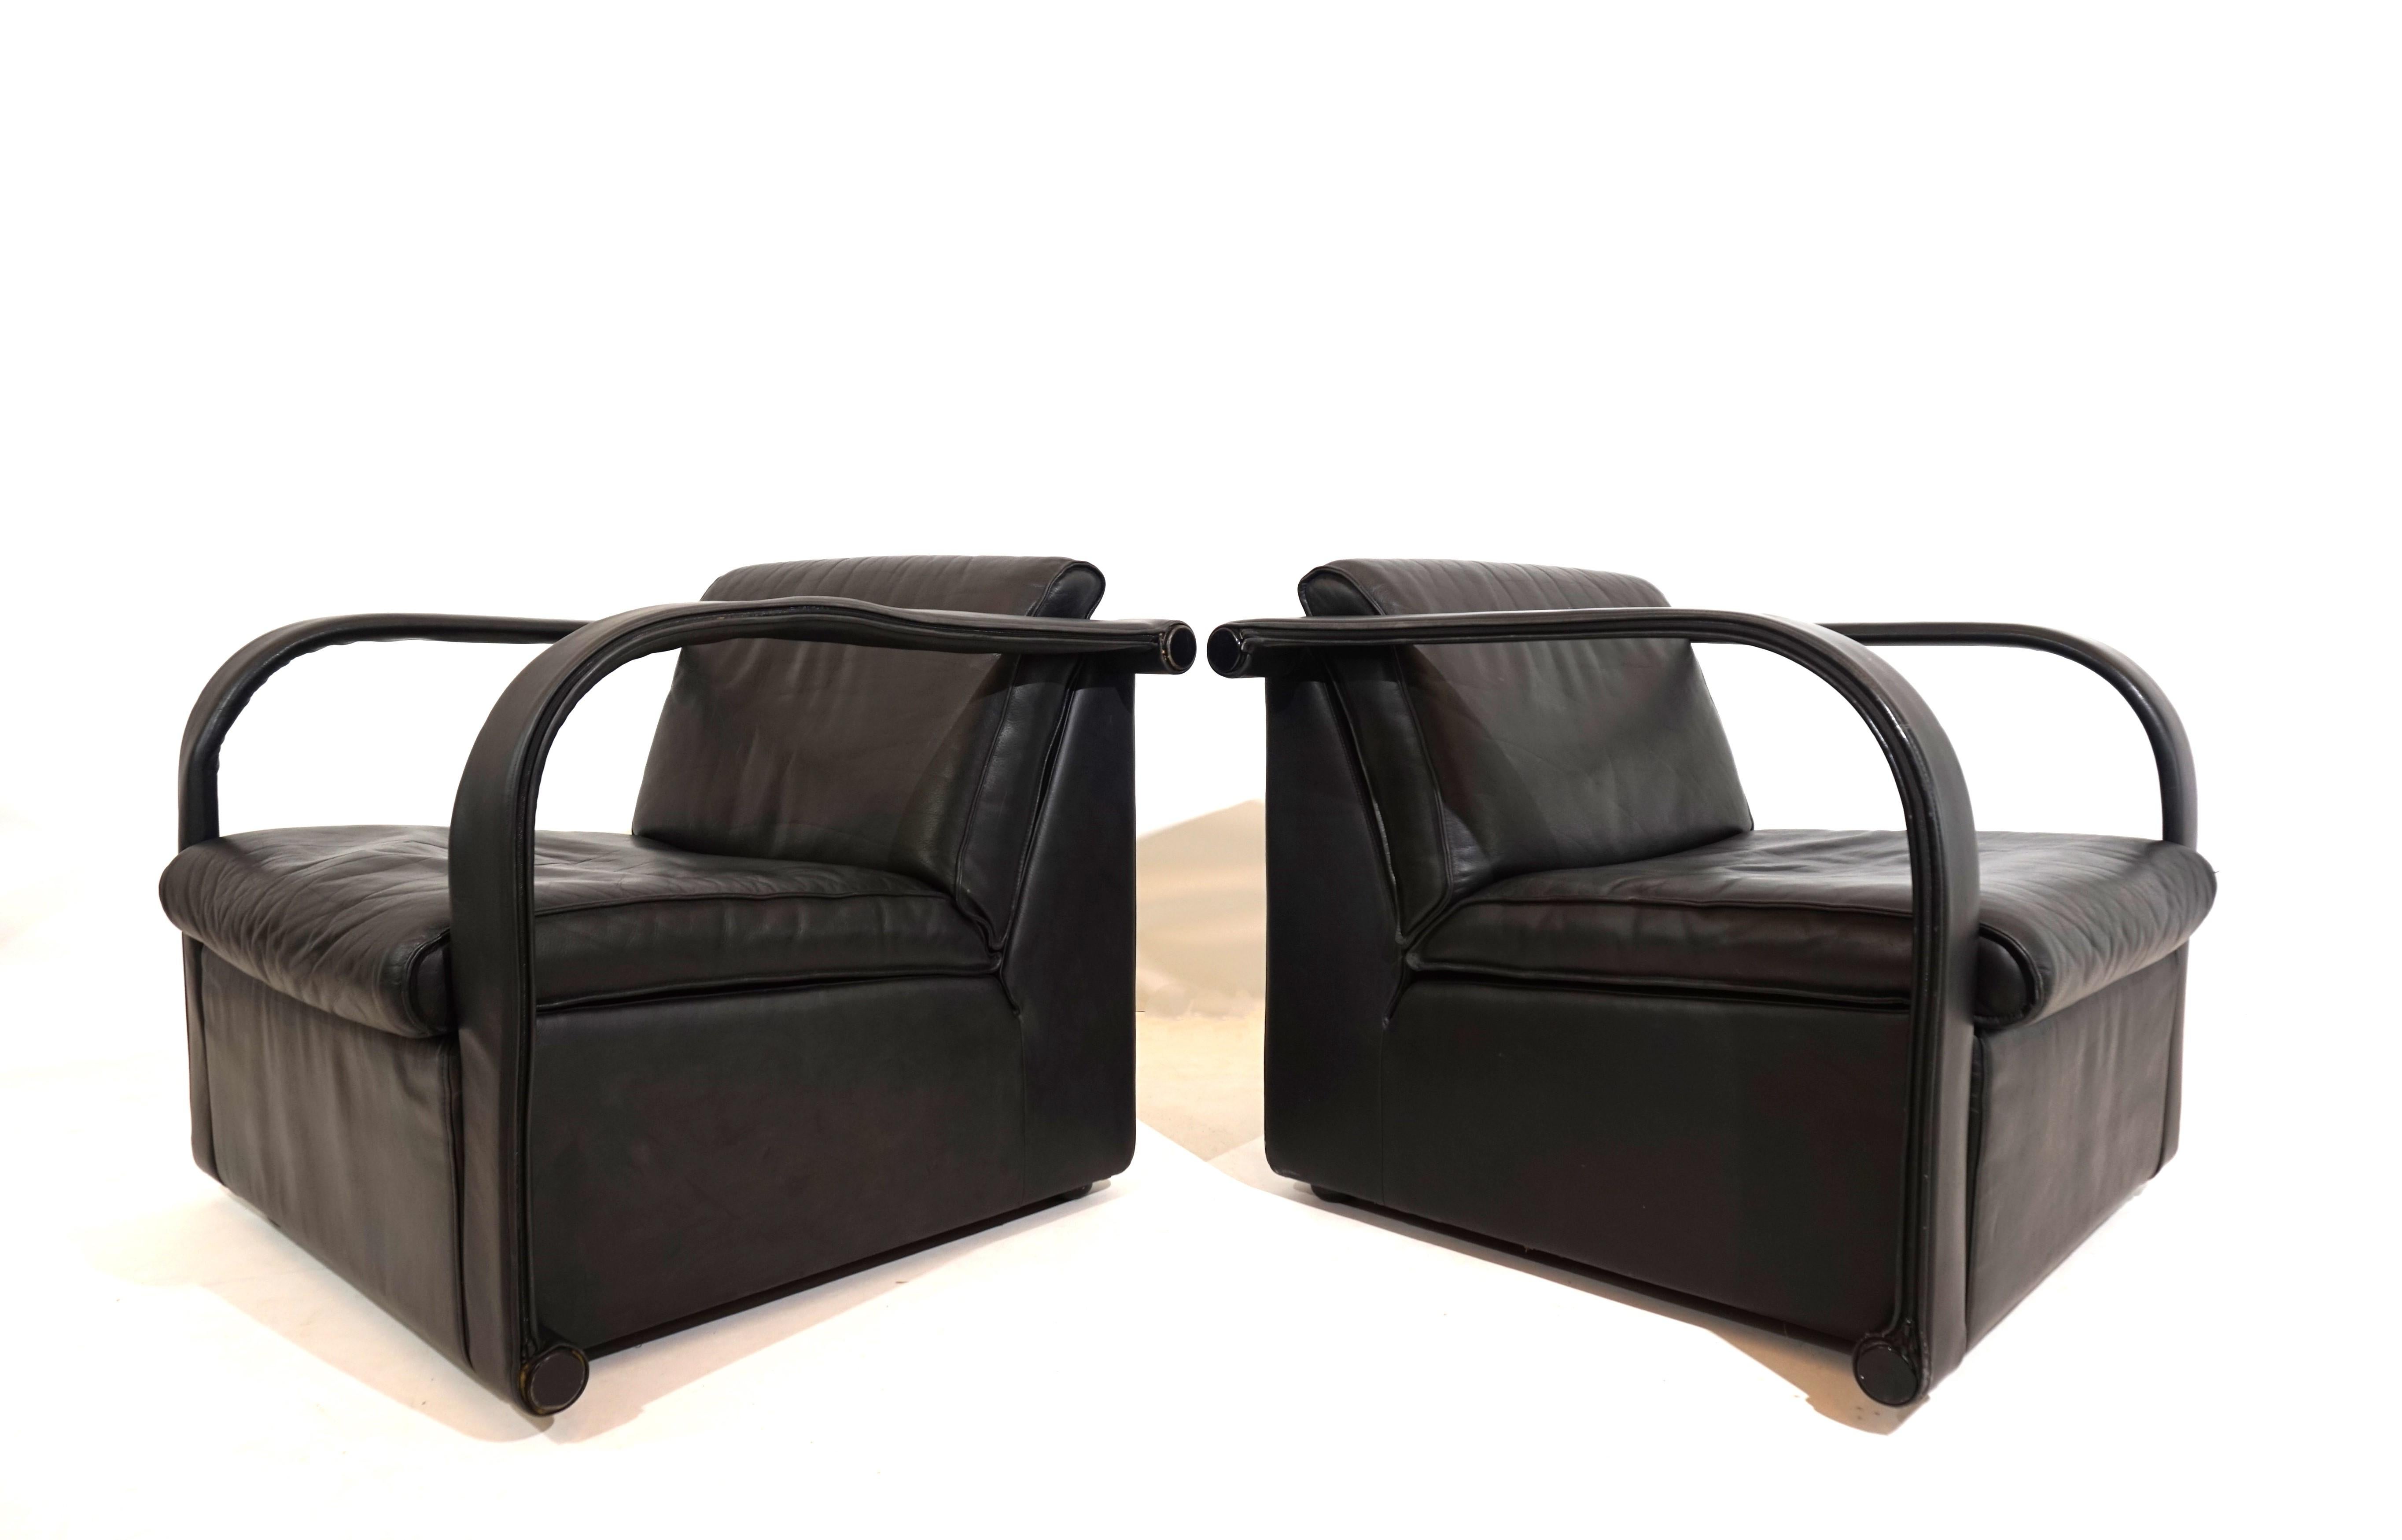 This pair of Arcona leather armchairs by Otto Zapf comes in very good condition. The thick black leather shows only minimal signs of wear. The back and seat cushions, as well as the leather coverings on the armrests, are attached with a zipper